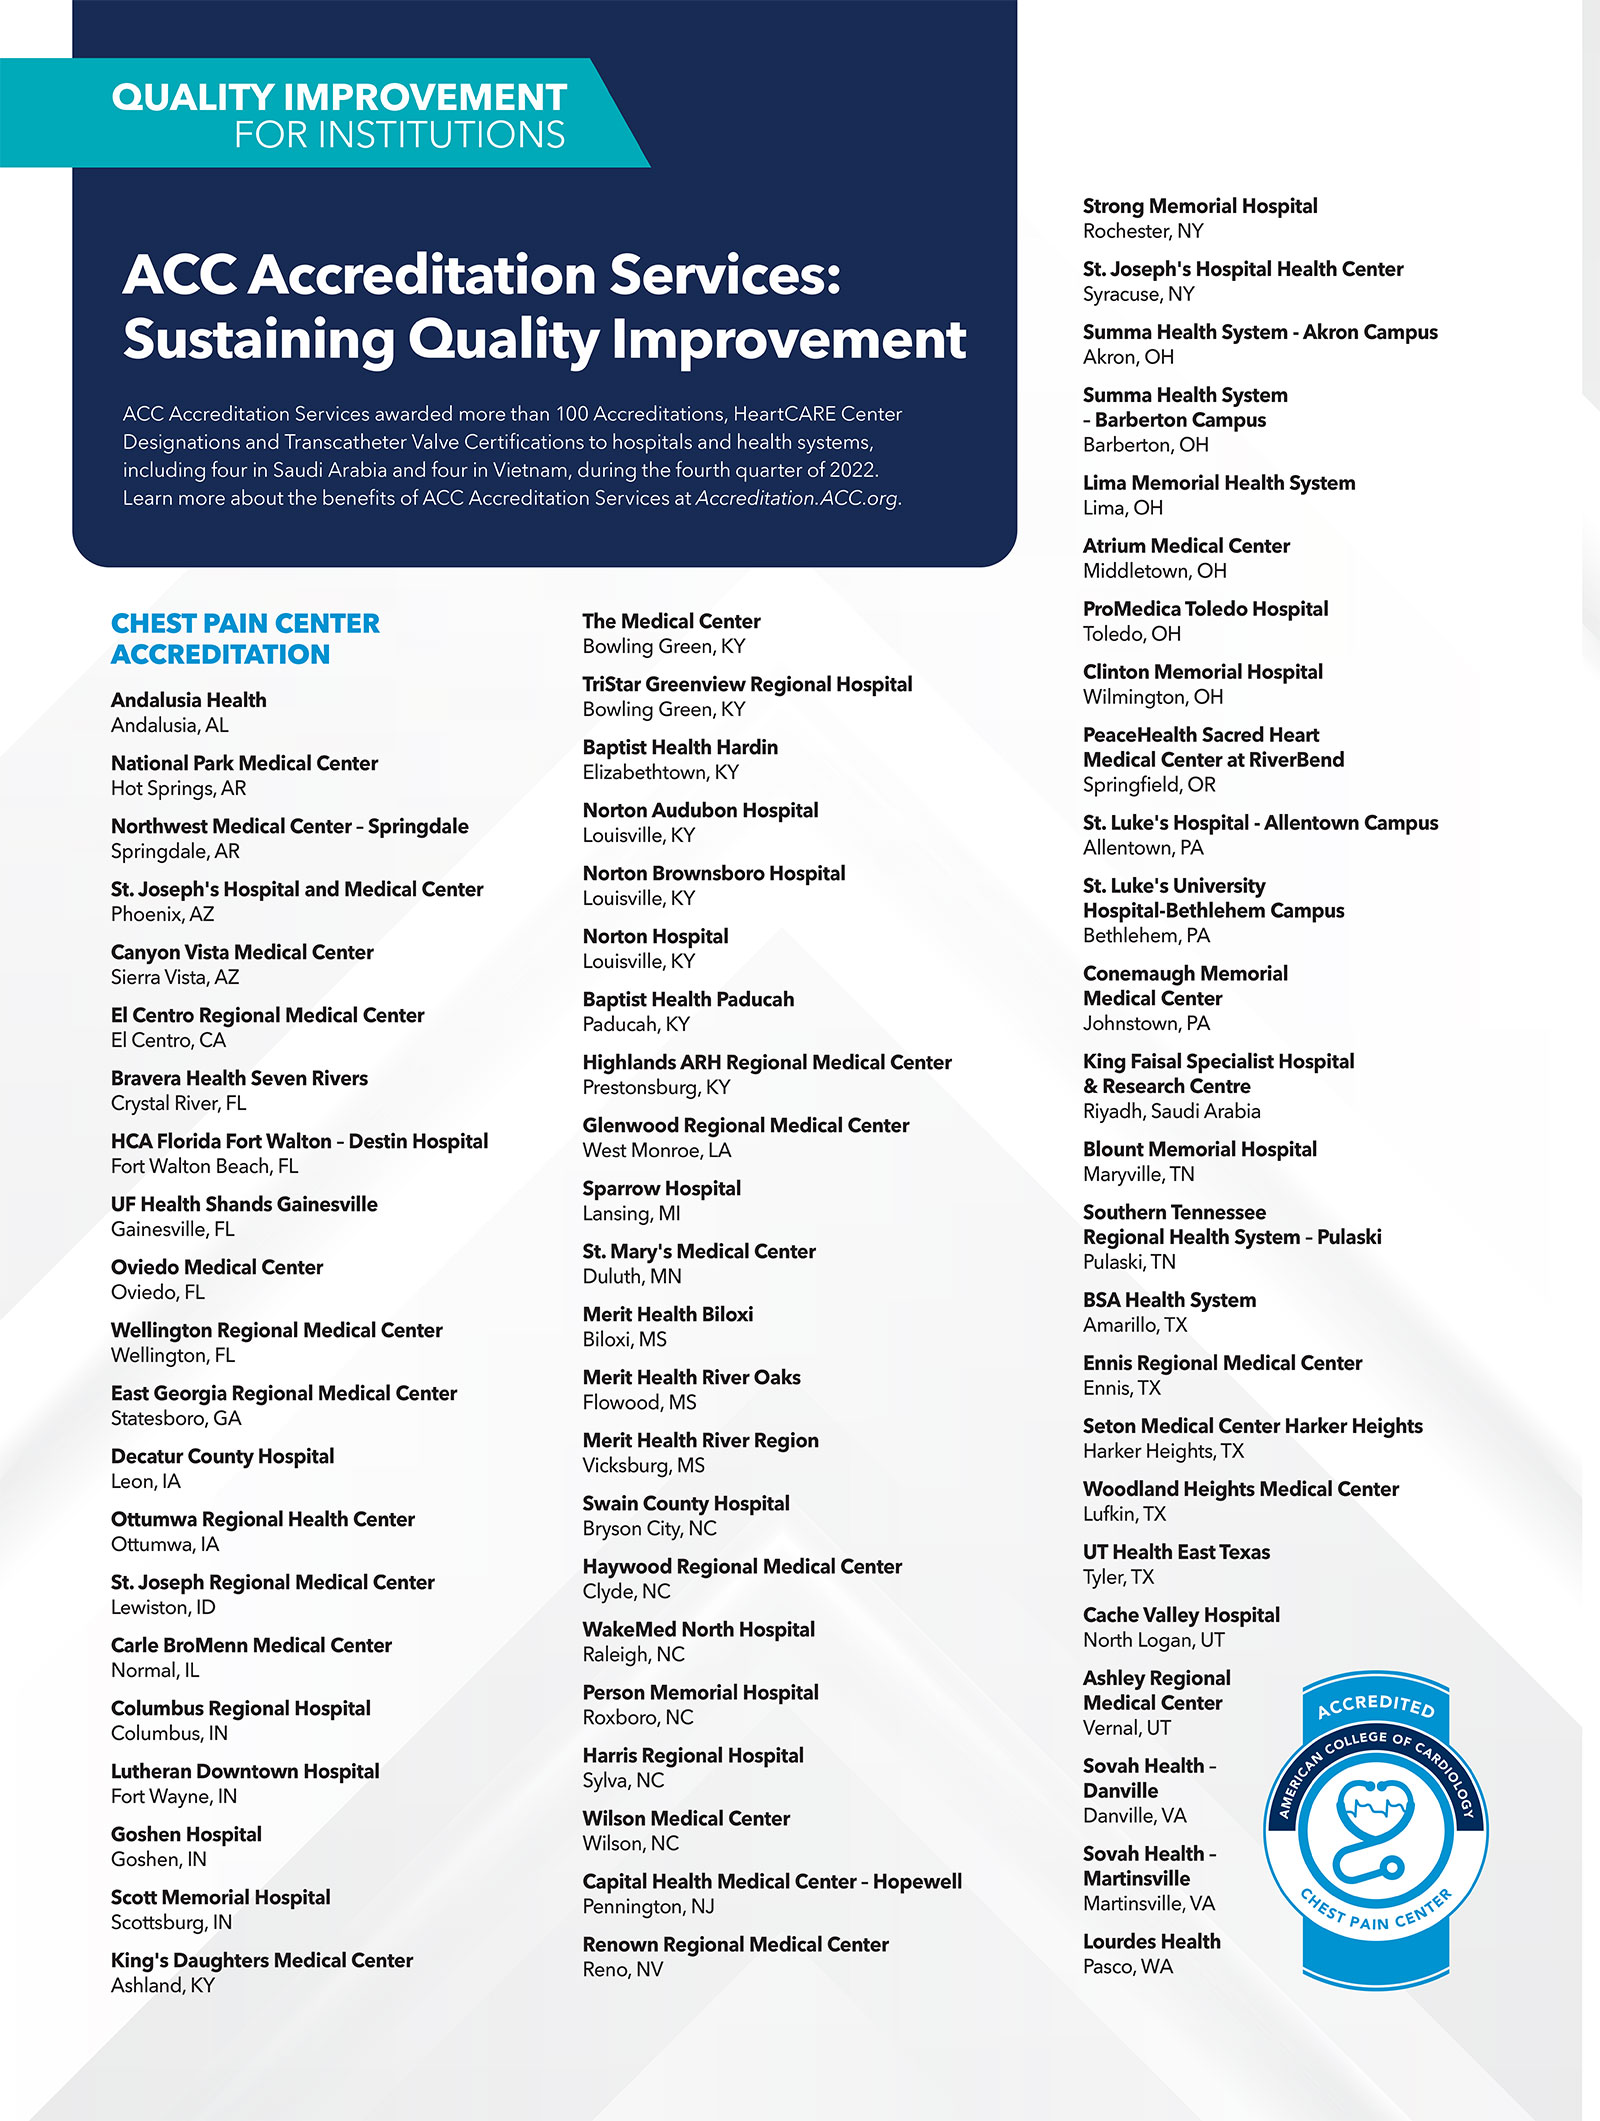 ACC Accreditation Services: Sustaining Quality Improvement